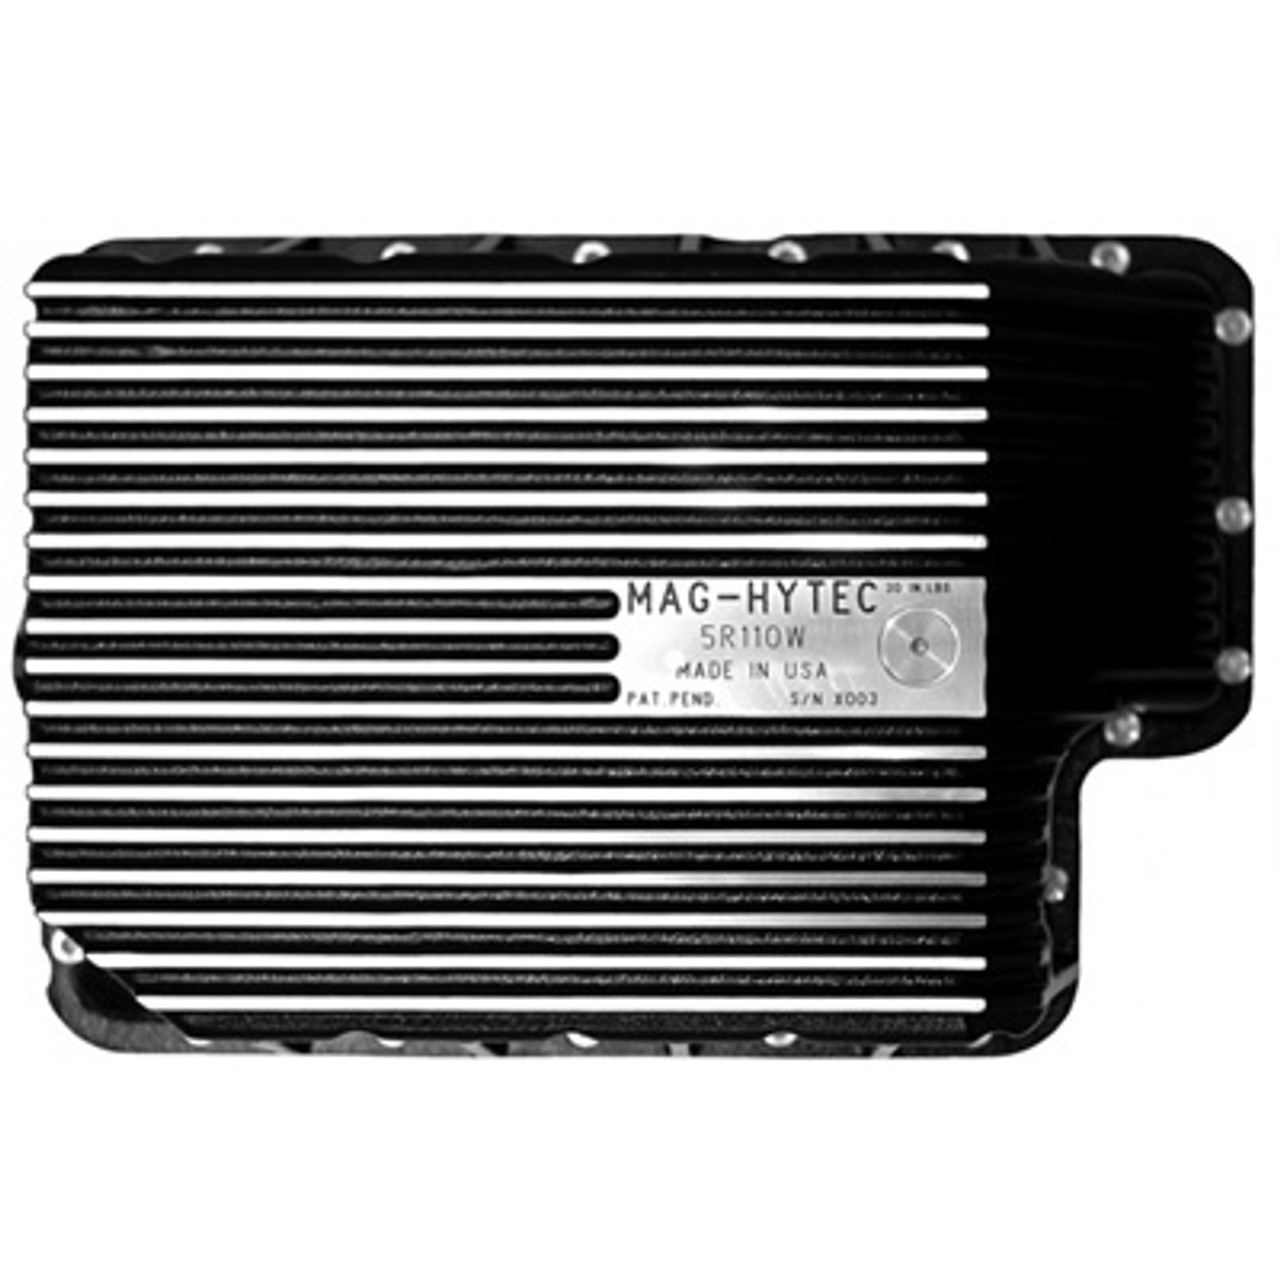 MAG-HYTEC F5R110W TRANSMISSION PAN 2008-2010 FORD 6.4L POWERSTROKE EQUIPPED WITH 5R110 (WITHOUT THE EXTERNAL SPIN ON FILTER)